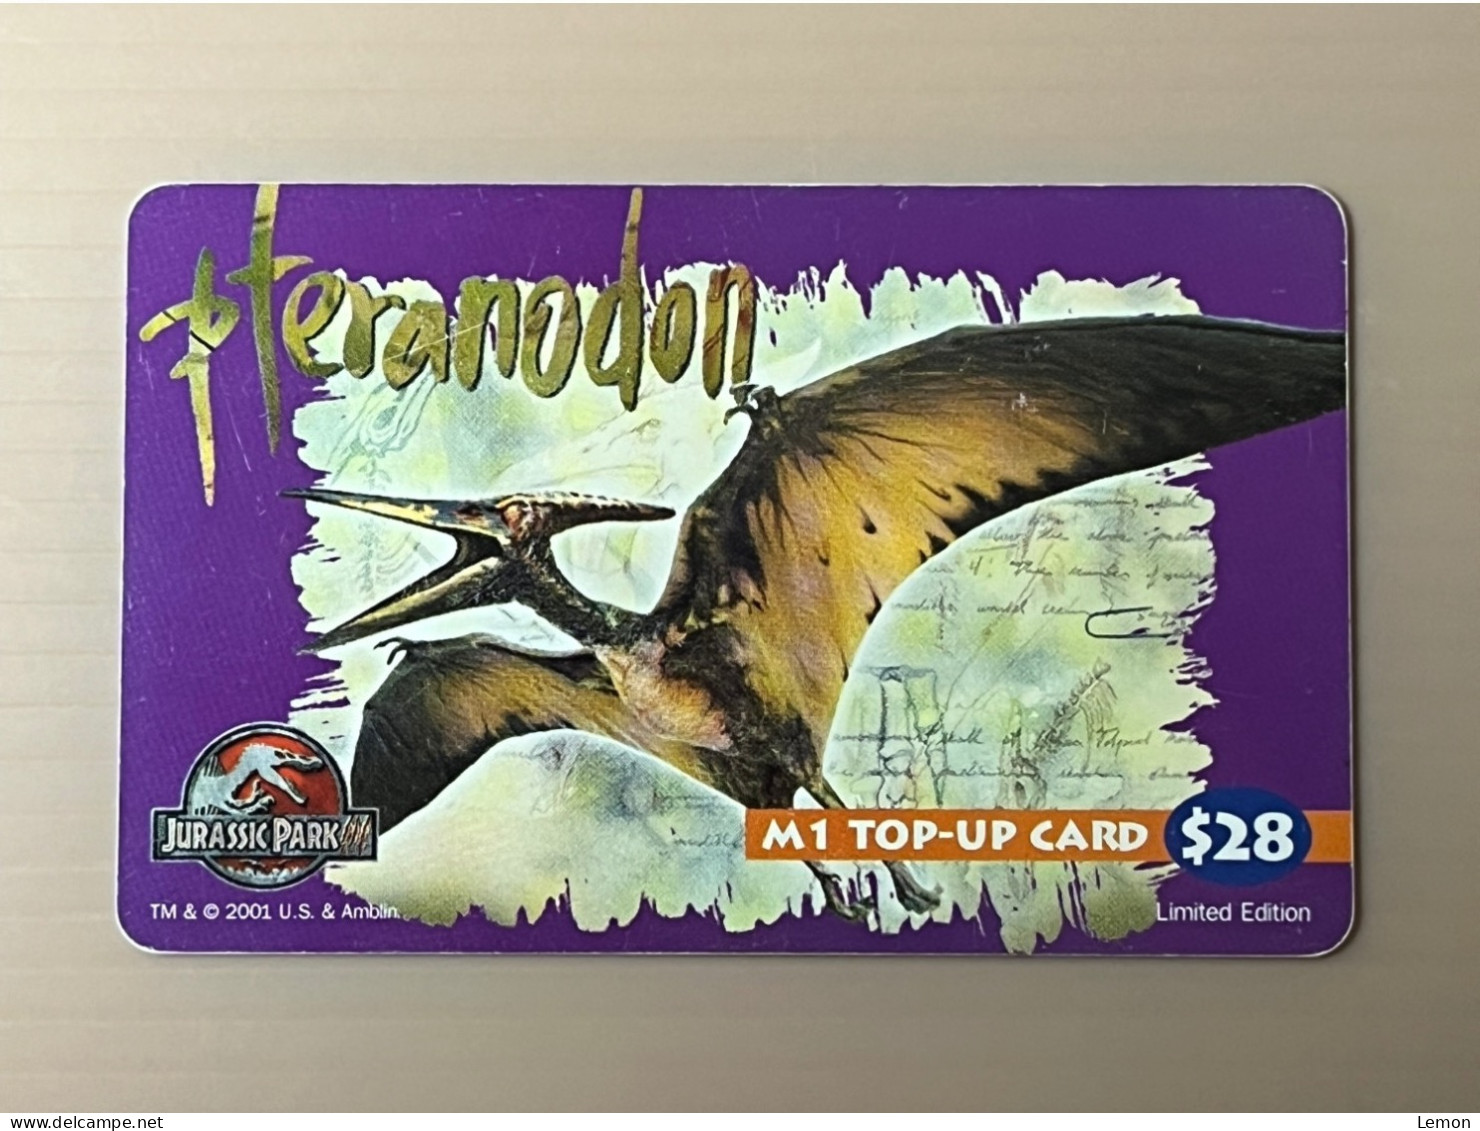 Singapore M1 Top-Up Card Phonecard, Jurassic Park, Set Of 1 Used Card - Singapore